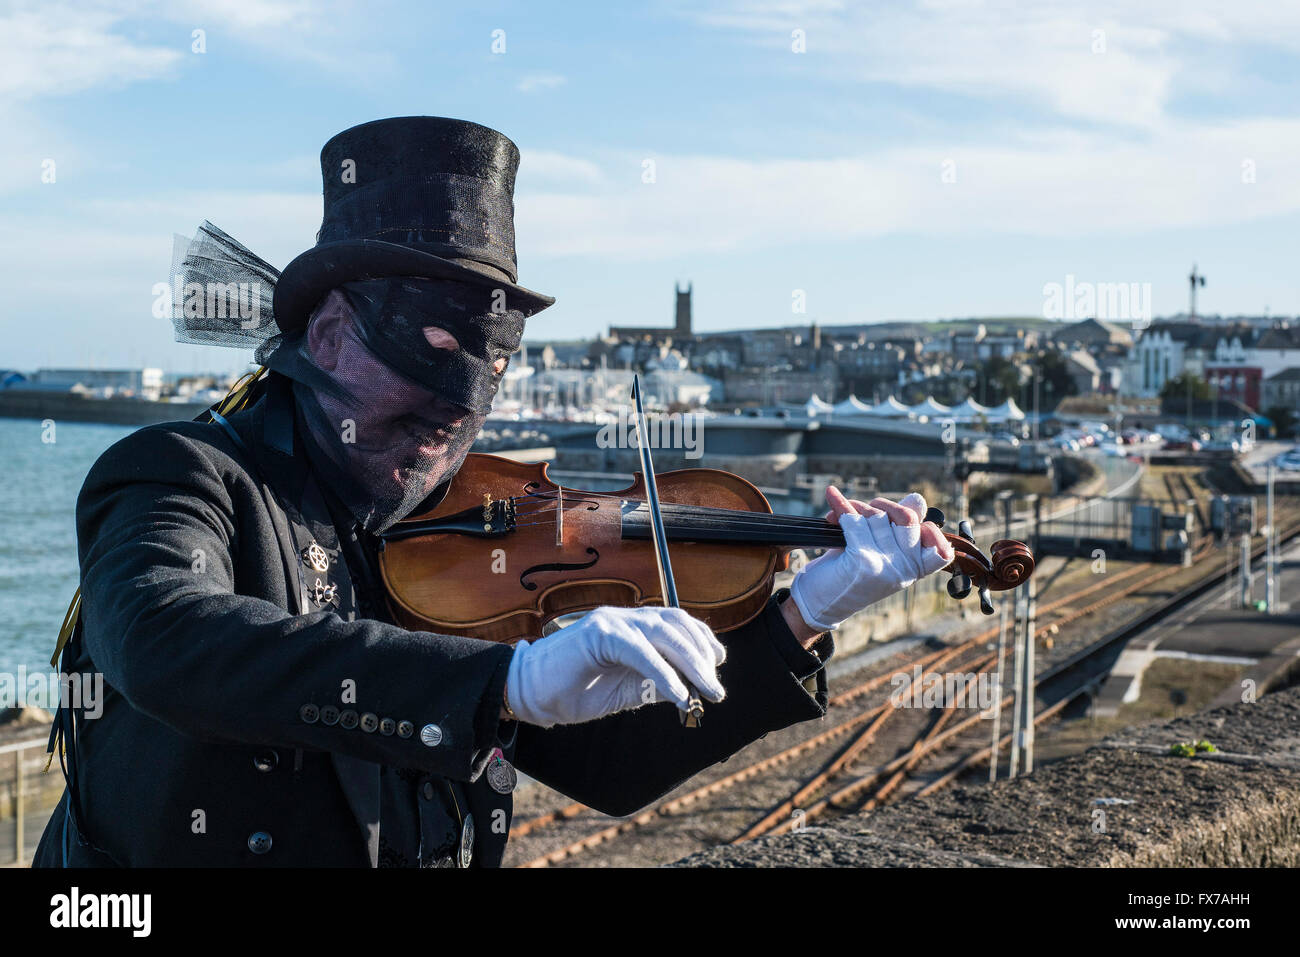 A masked guiser plays the violin with the town of Penzance in the background. Stock Photo